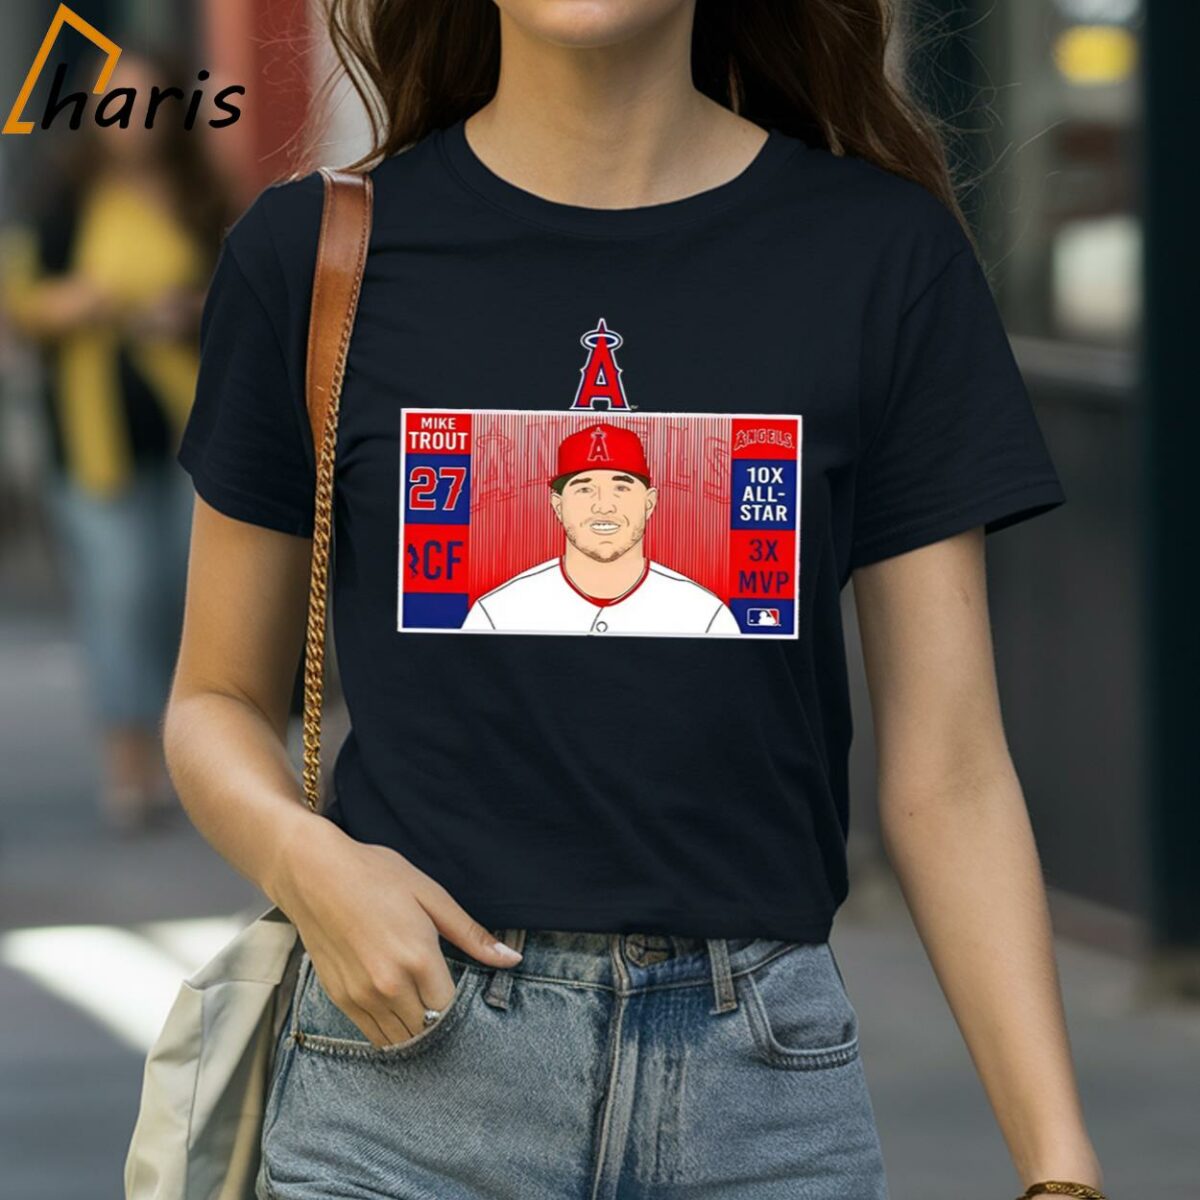 Los Angeles Angels 27 Mike Trout 10x all star 3x MVP shirt 2 shirt